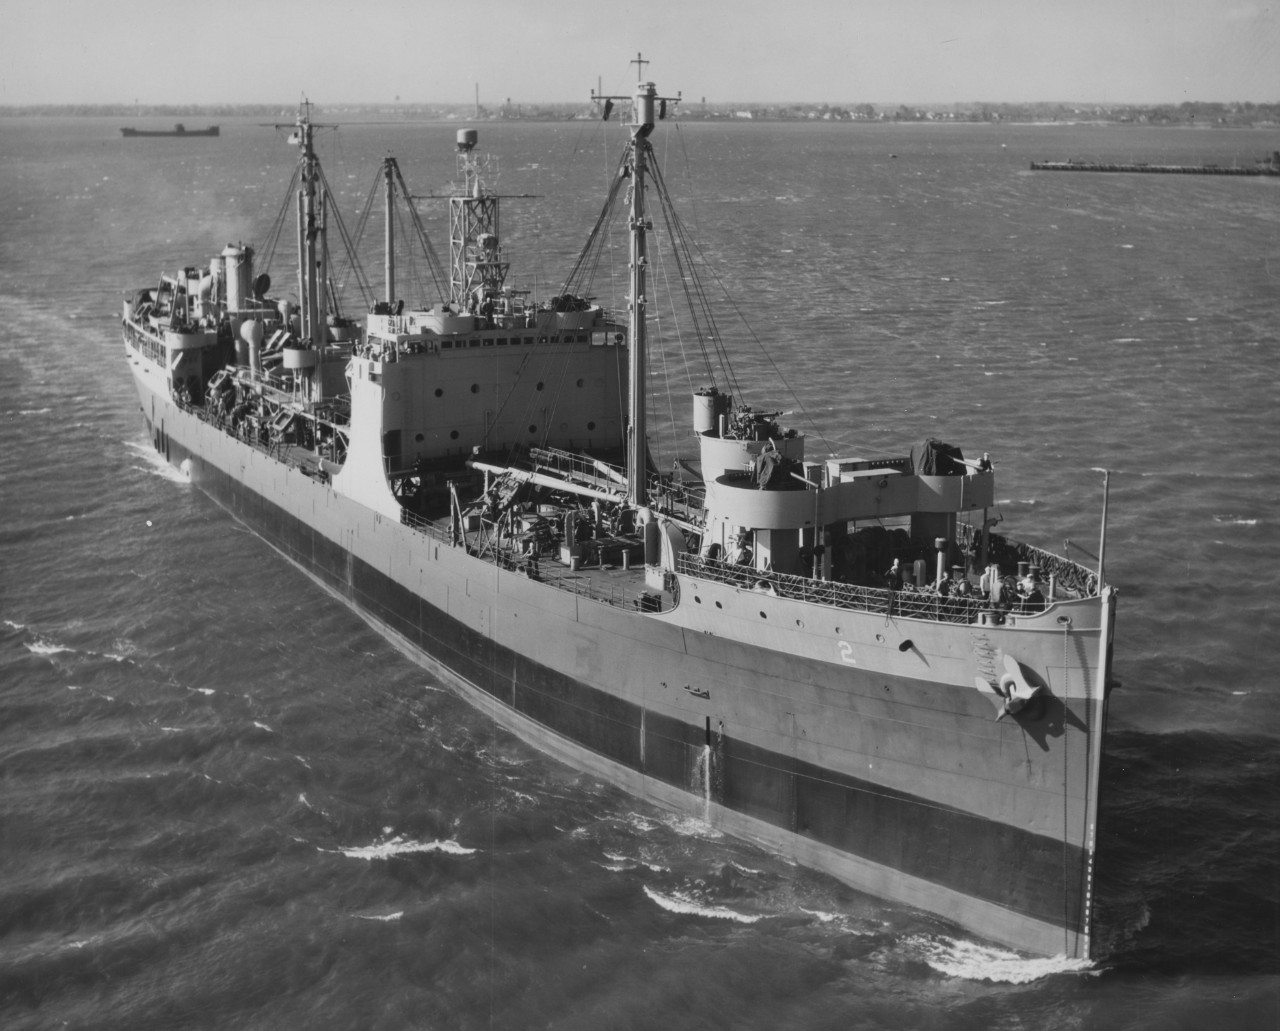 Riding high in the water following her refit at Norfolk Navy Yard, Maumee in Hampton Roads, 31 March 1945. (U.S. Navy Bureau of Ships Photograph, 19-LCM Collection, Box 93, National Archives and Records Administration, Still Pictures Branch, Coll...